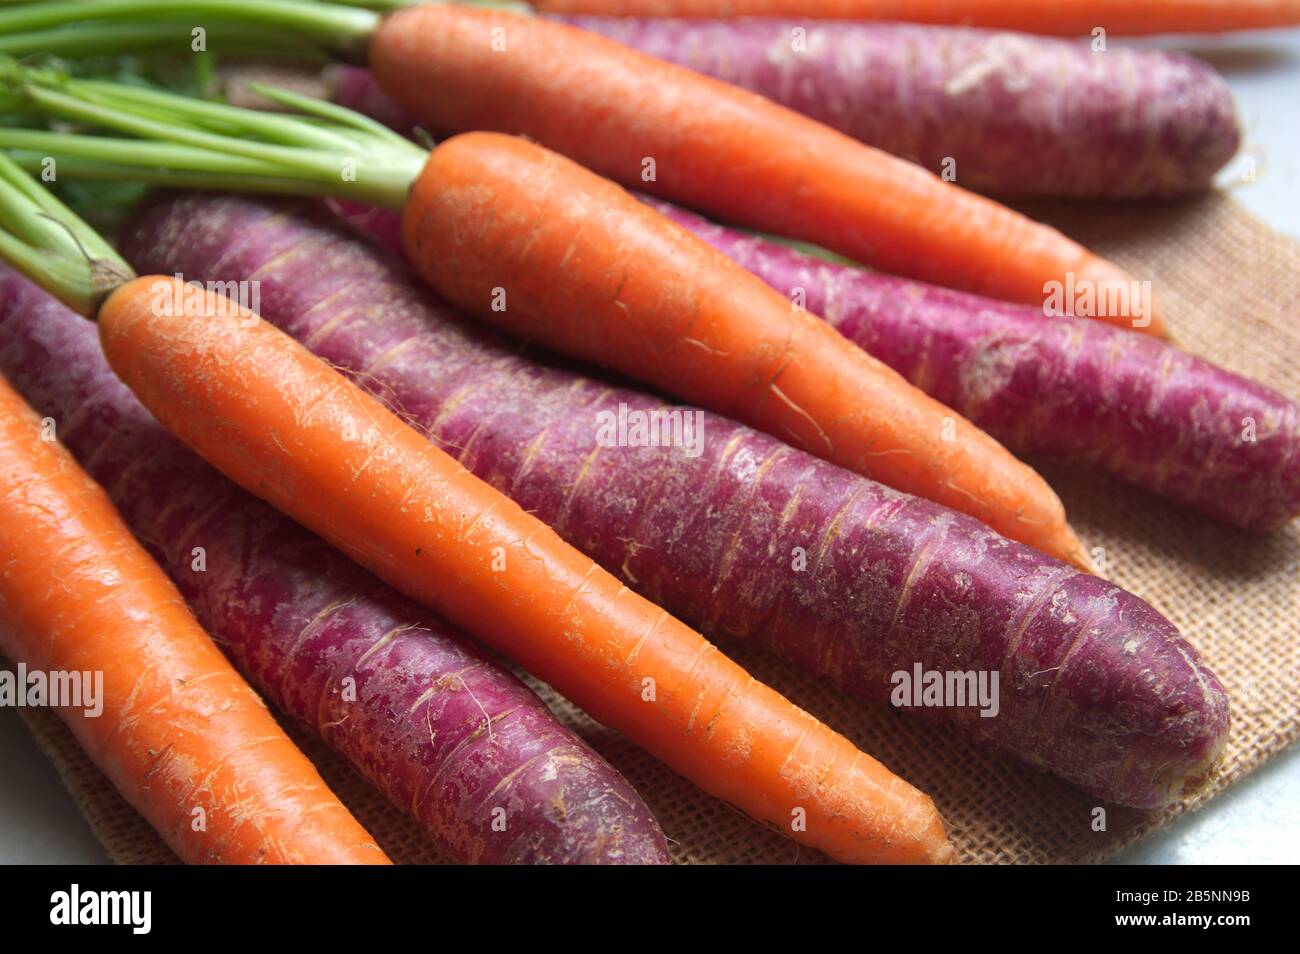 Purple and orange carrots on a brown sackcloth with natural window light Stock Photo